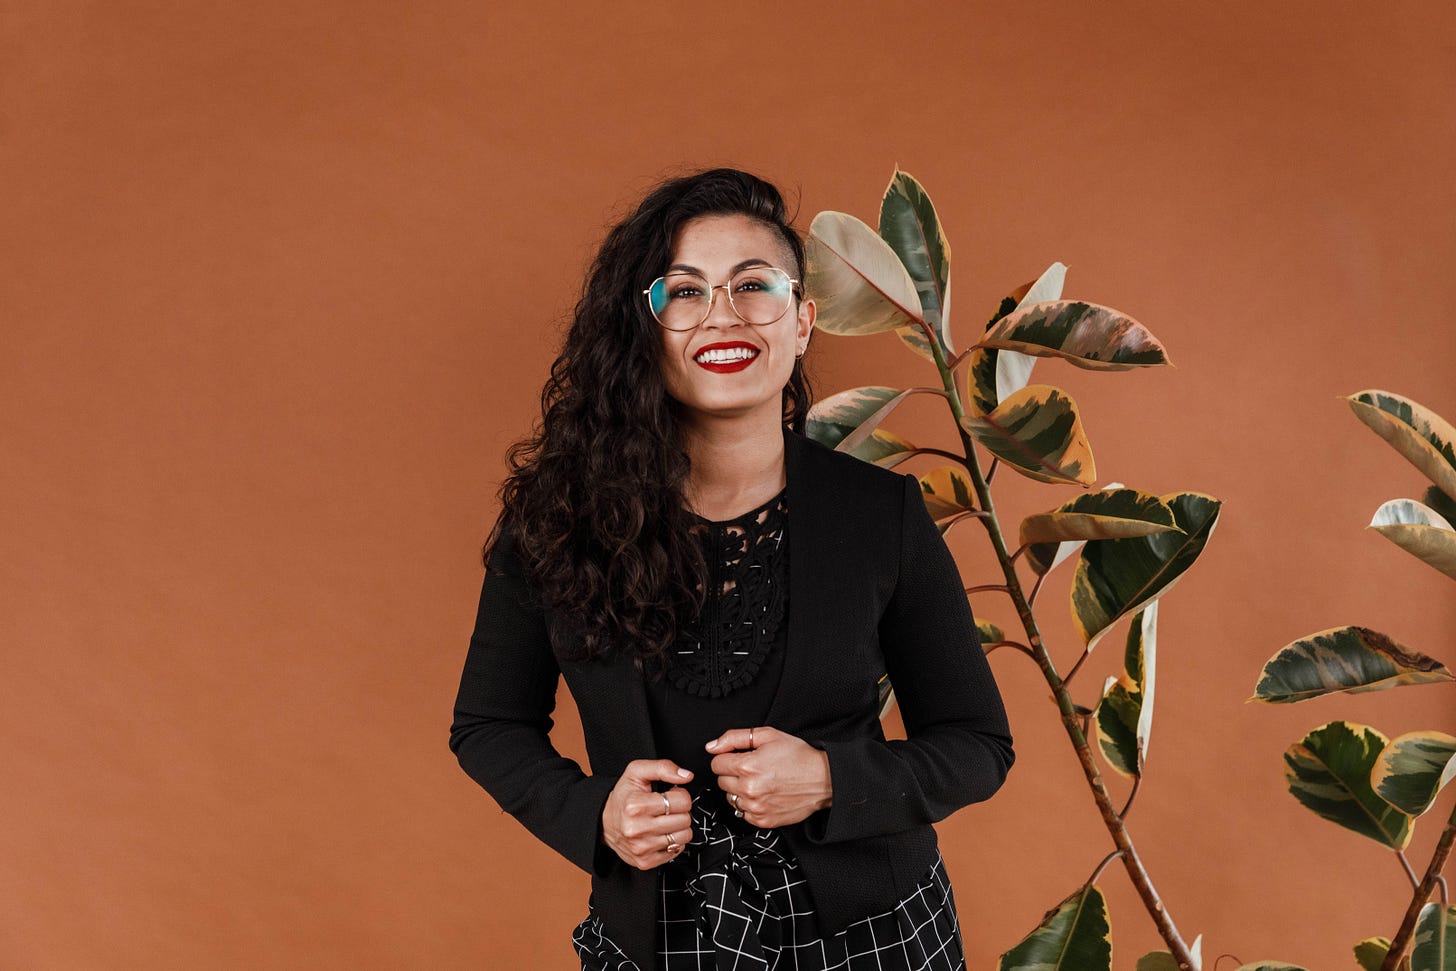 Pam Covarrubias in a black top next to a large plant against a dark orange background